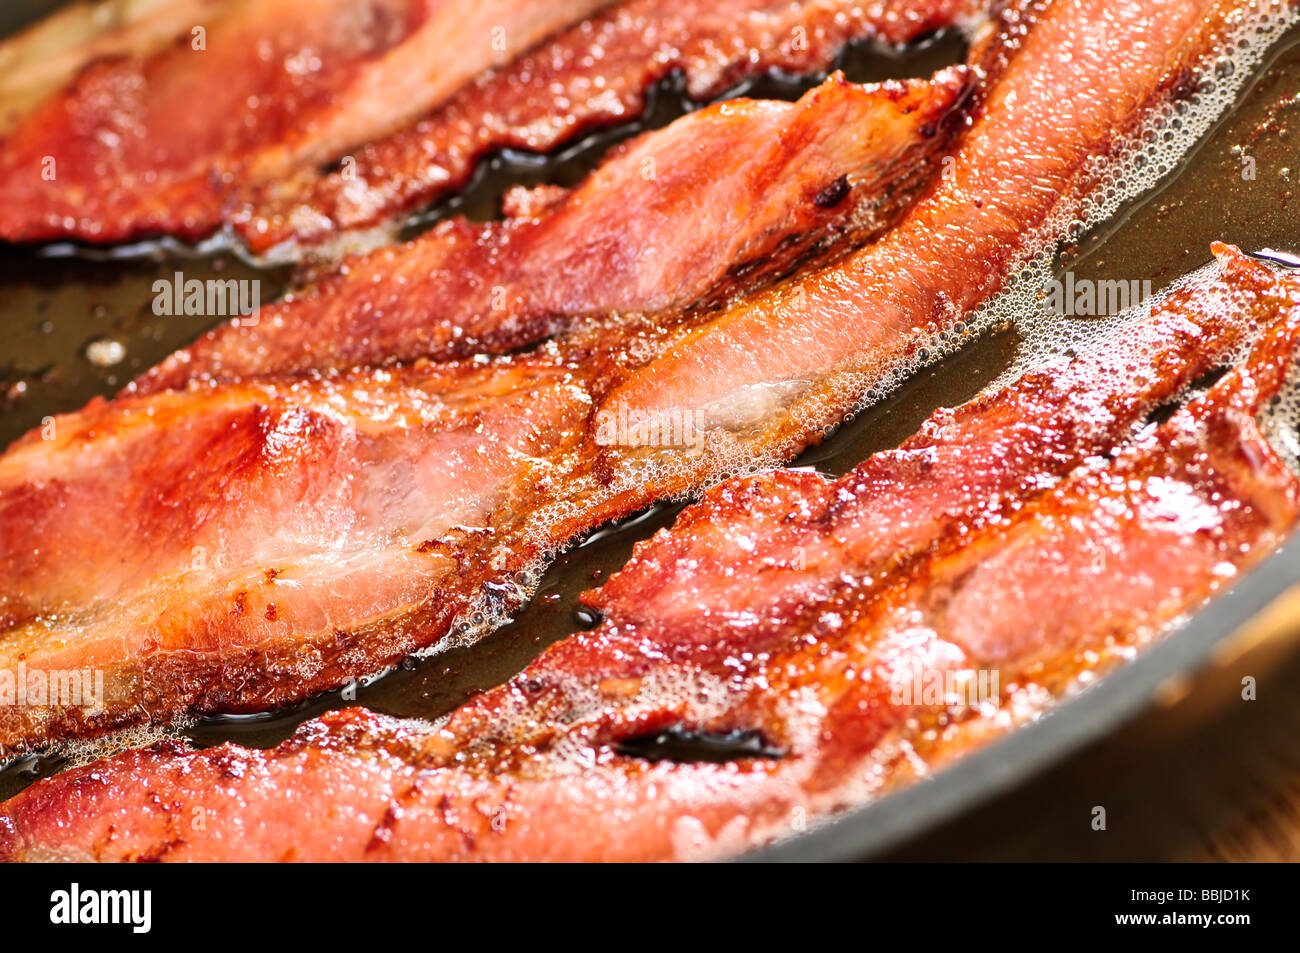 Bacon cooking in a frying pan Stock Photo - Alamy